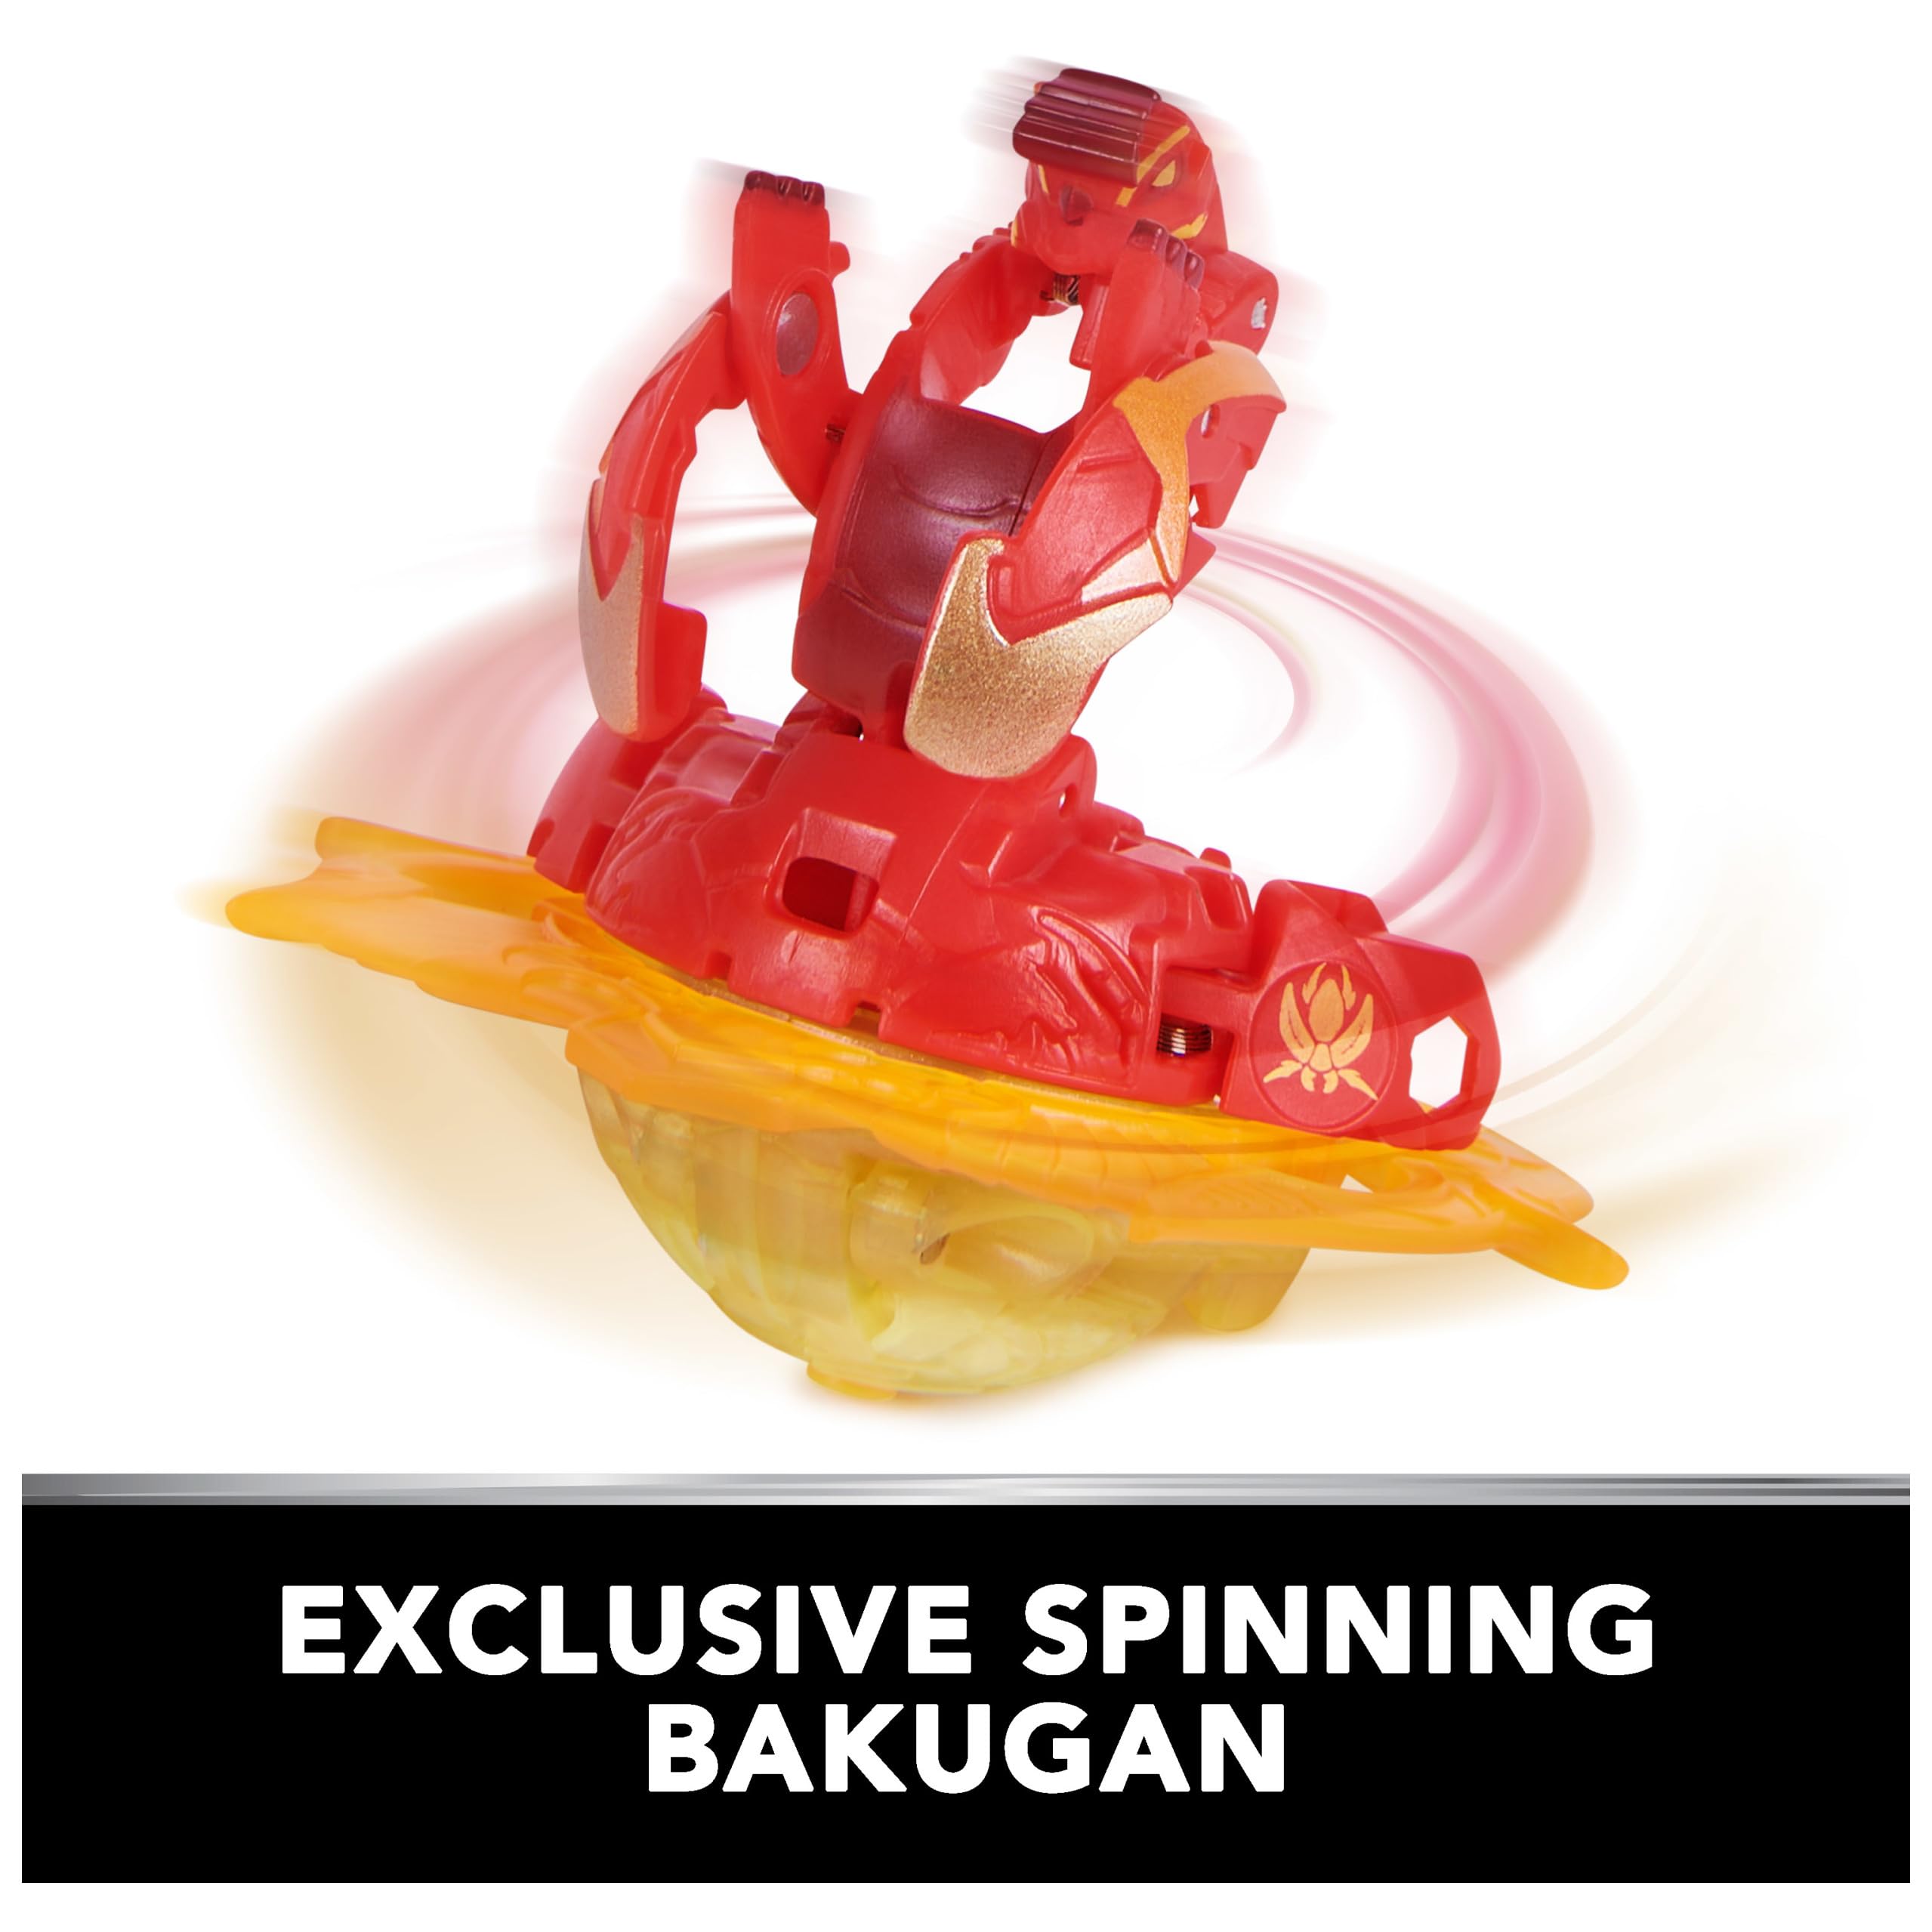 Bakugan Baku-tin with Special Attack Mantid, Customizable, Spinning Action Figure and Toy Storage, Kids Toys for Boys and Girls 6 and up